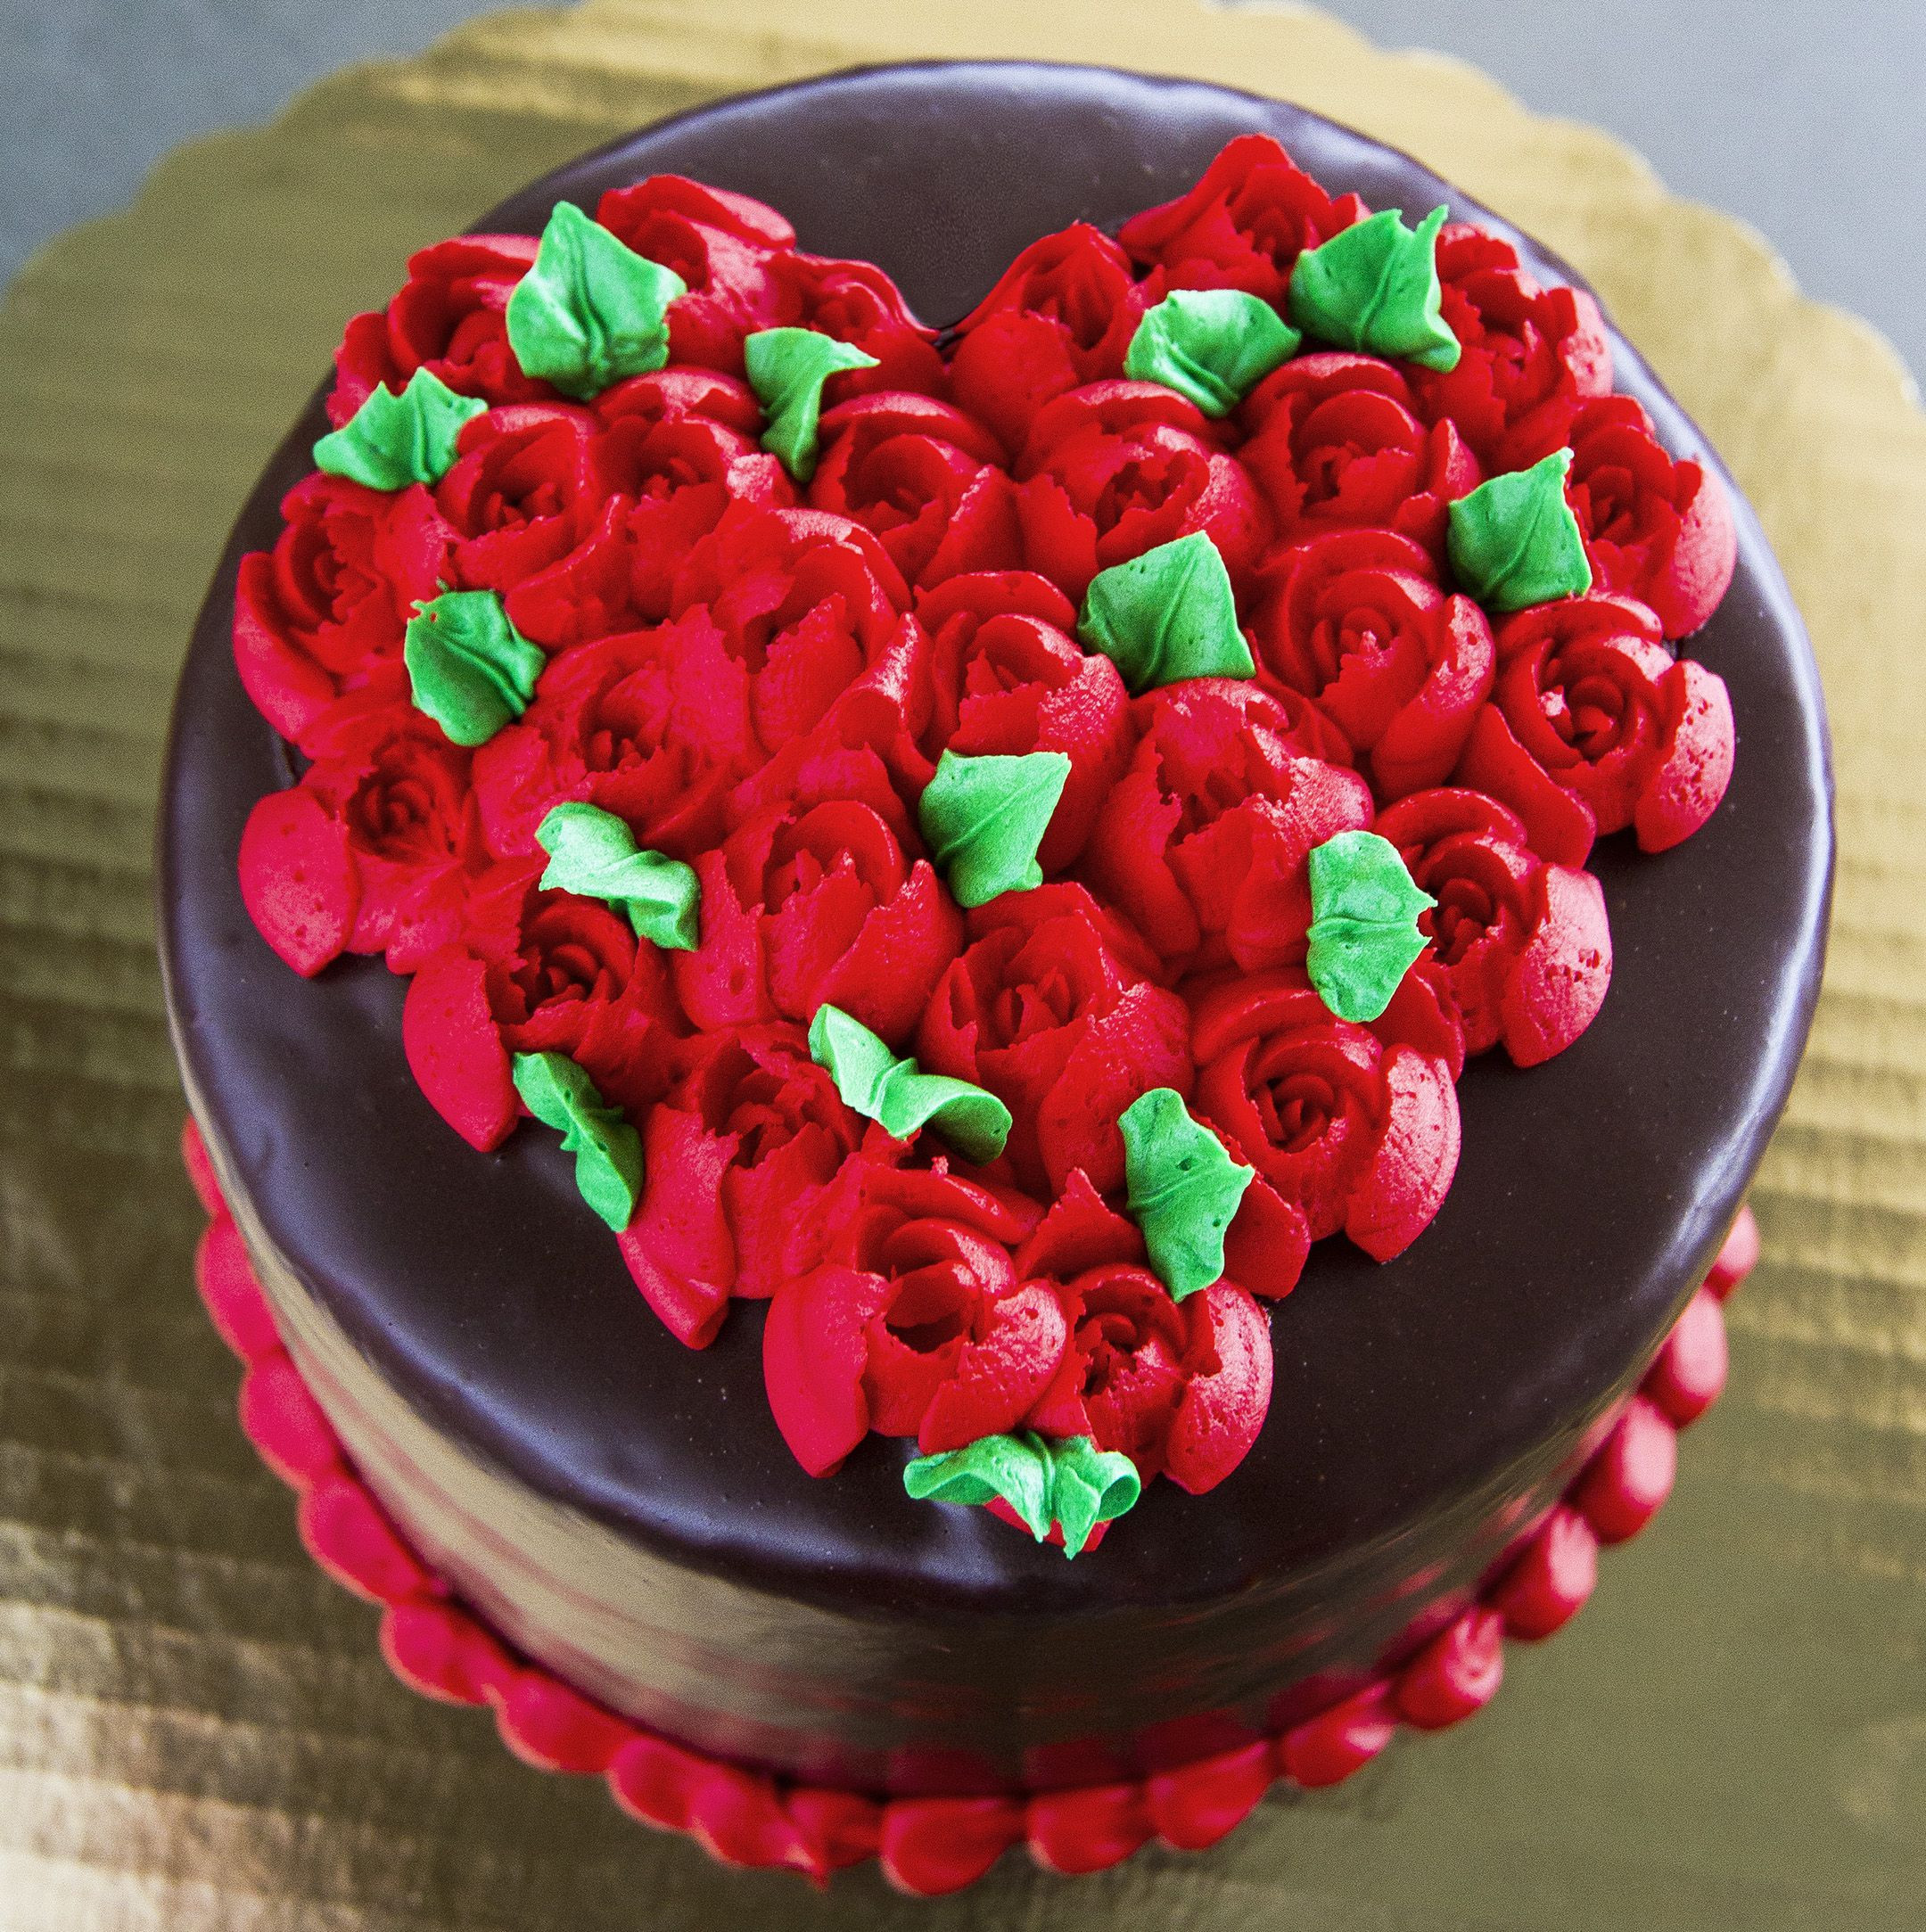 Valentines Day Cake Ideas
 Our chocolate ganache Valentine s Day cake for two Cake